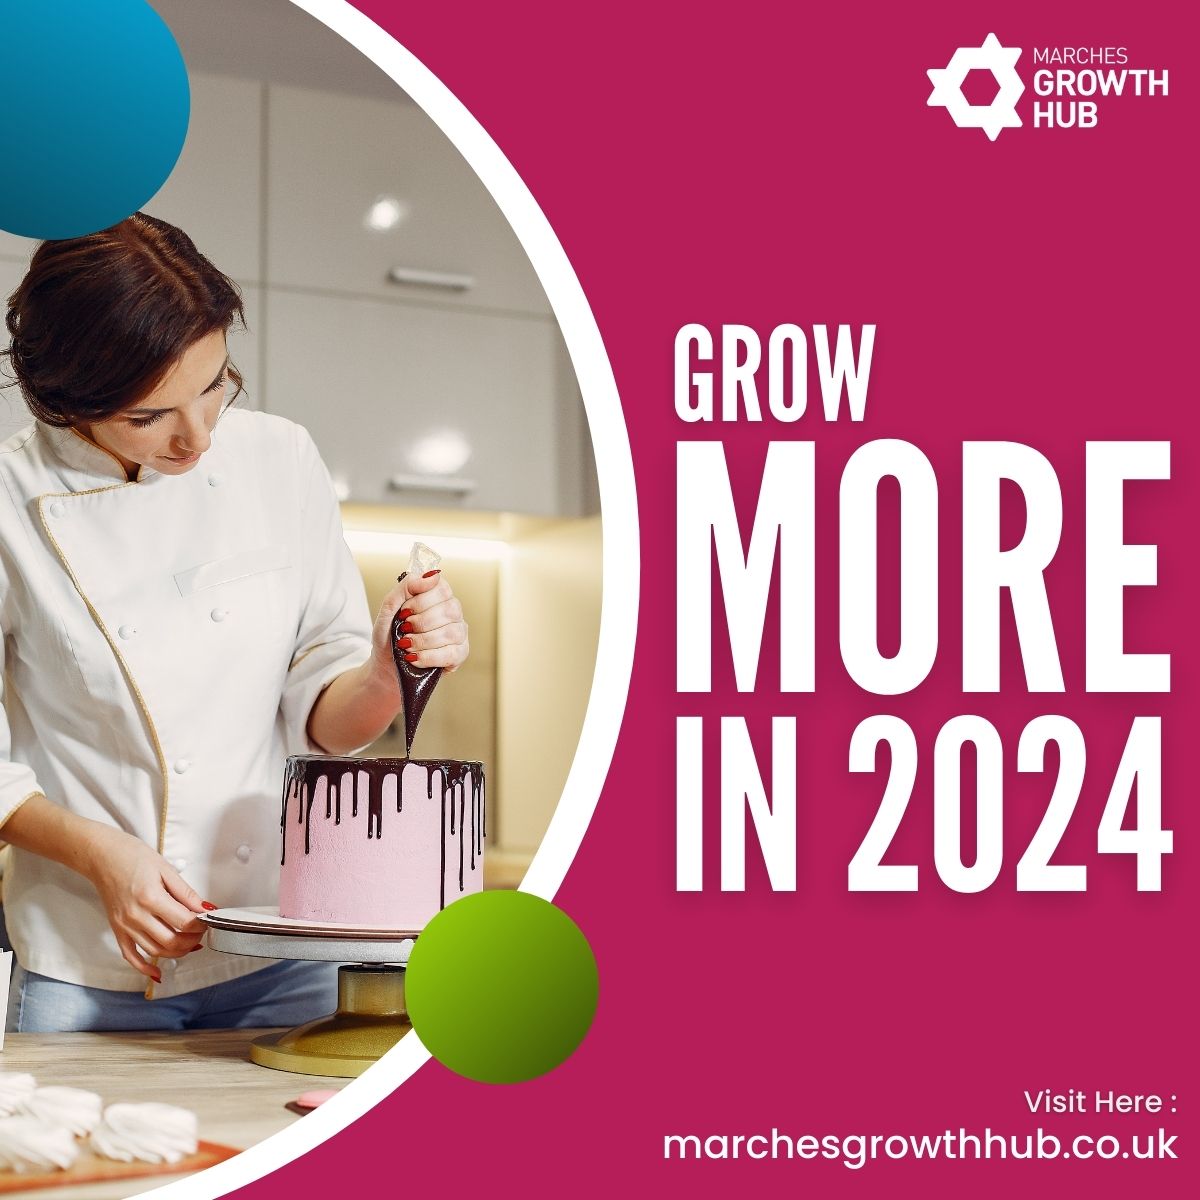 Did you know? The Marches Growth Hub is your gateway business support. Explore our website for a variety of funding, events, seminars and expert advice. bit.ly/49ovp6e Let's make 2024 the year your business thrives. #GrowMoreIn2024